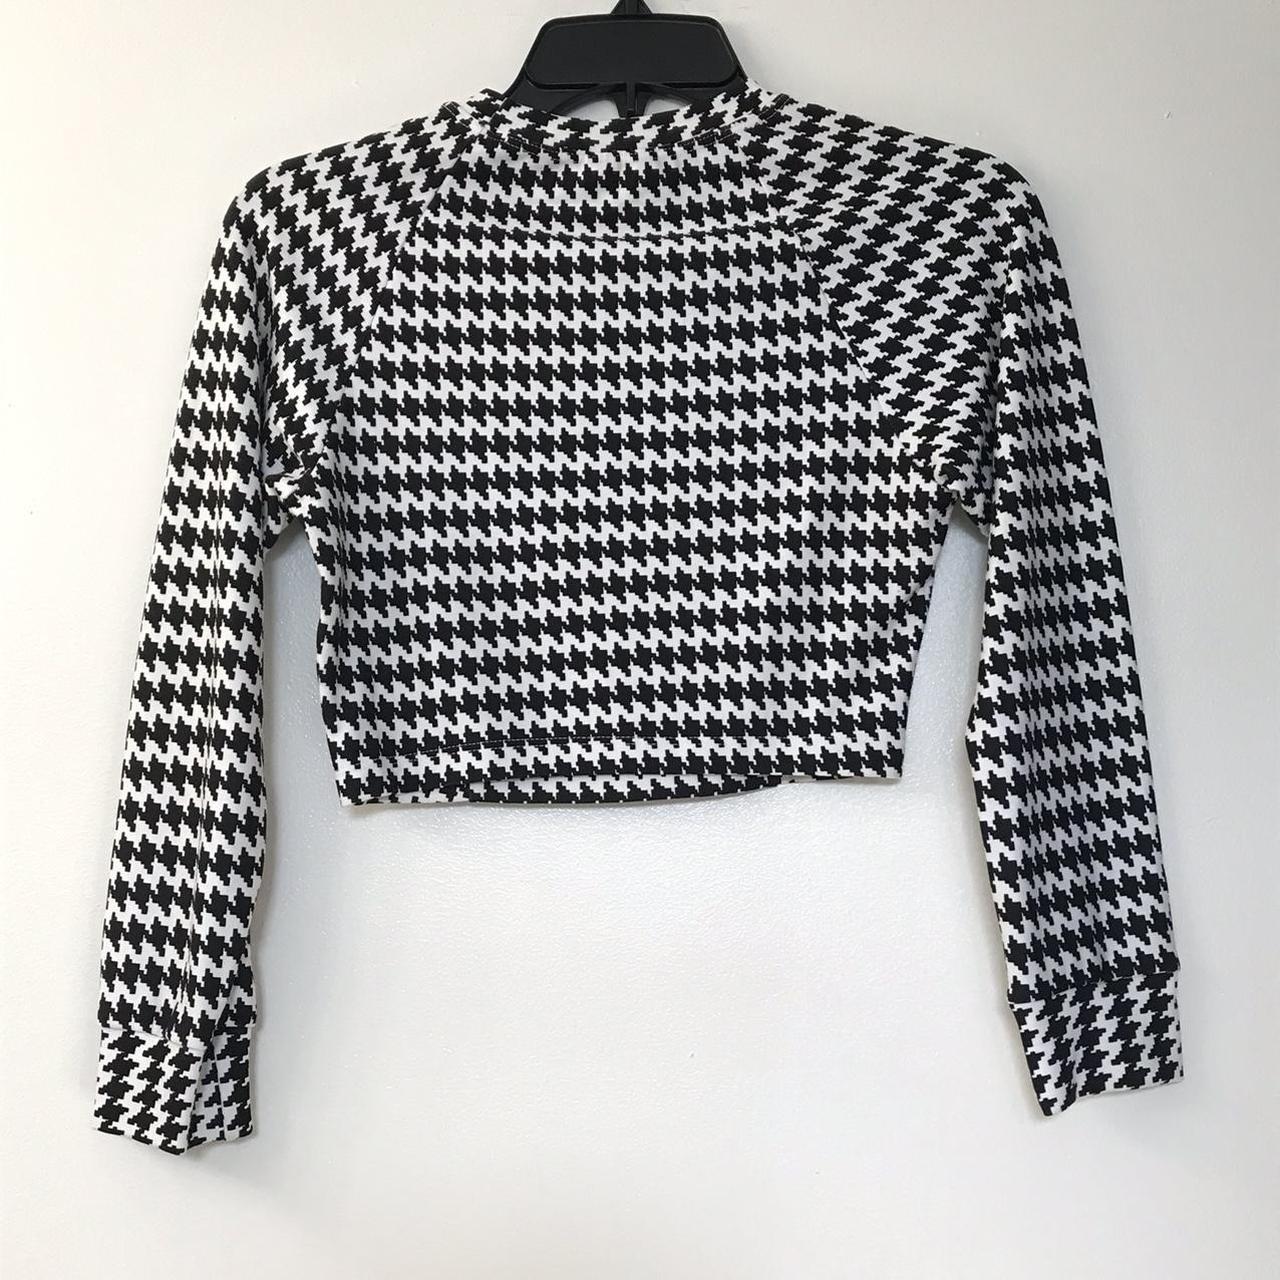 American Apparel Women's Black and White Crop-top (4)